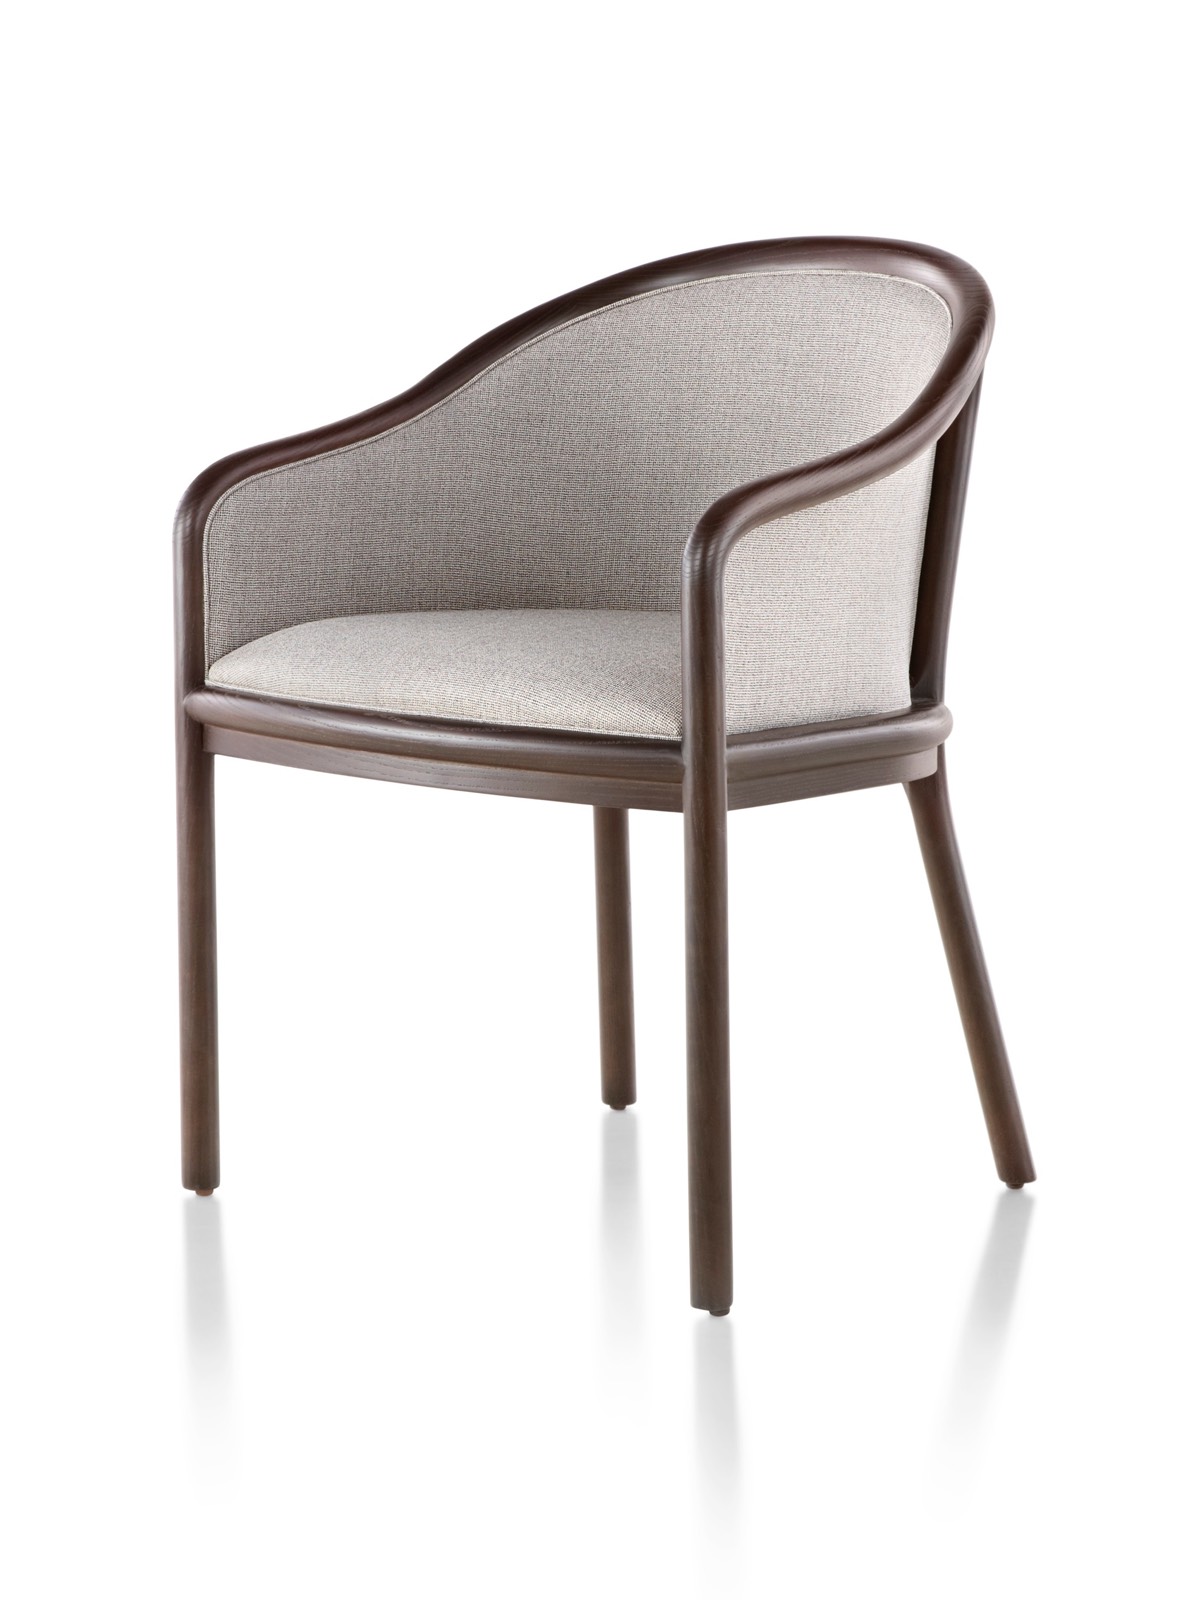 Landmark Chair with taupe upholstery and a dark wood frame, viewed from a 45-degree angle.